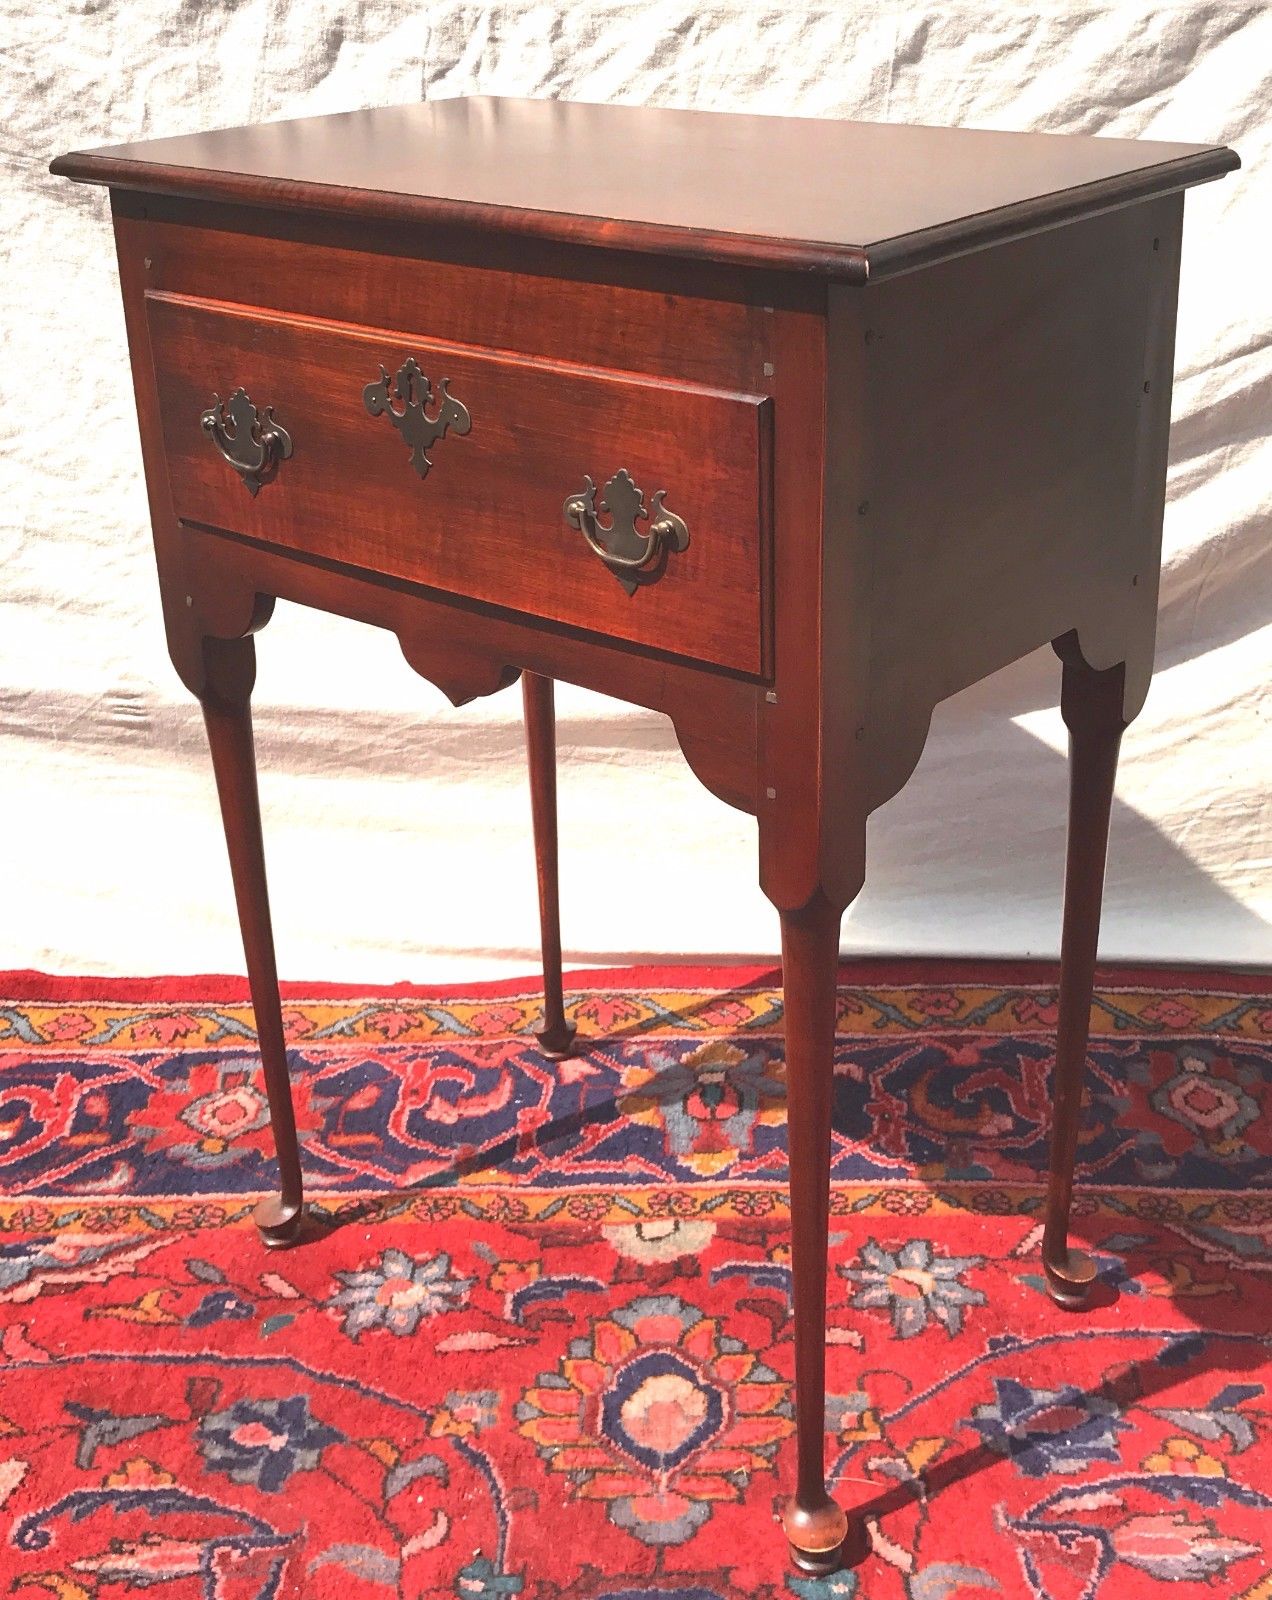 HIGHLY FIGURED CHERRY QUEEN ANNE SERVING TABLE -PEG JOINED & TOP QUALITY ITEM!